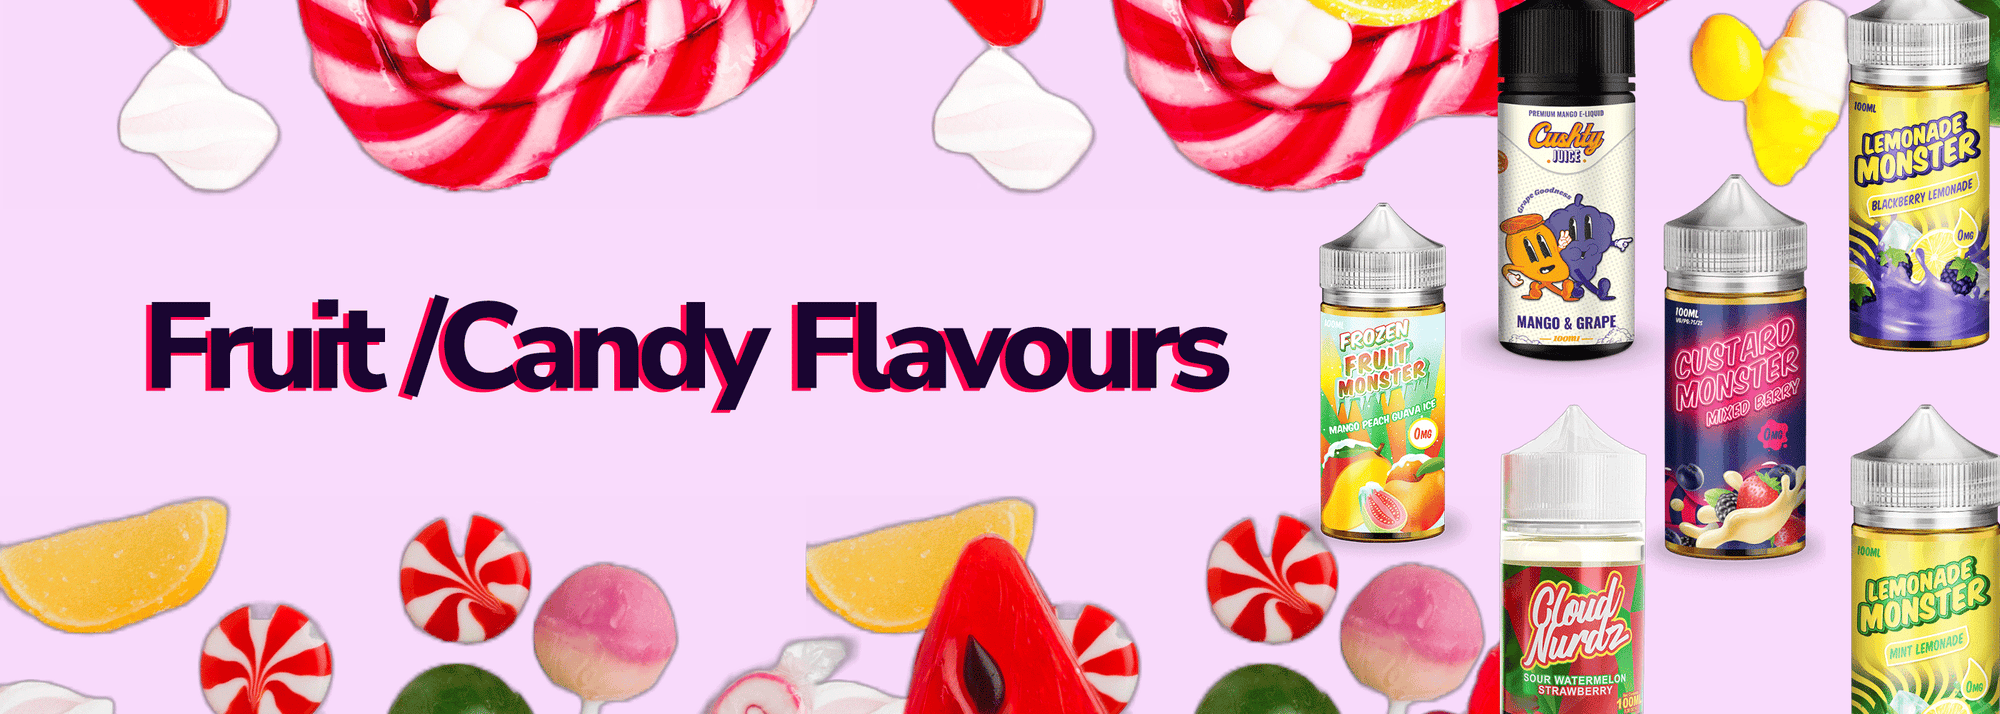 BUY FRUIT AND CANDY FLAVORED VAPE JUICE - Wick and Wire Co Melbourne Vape Shop, Victoria Australia